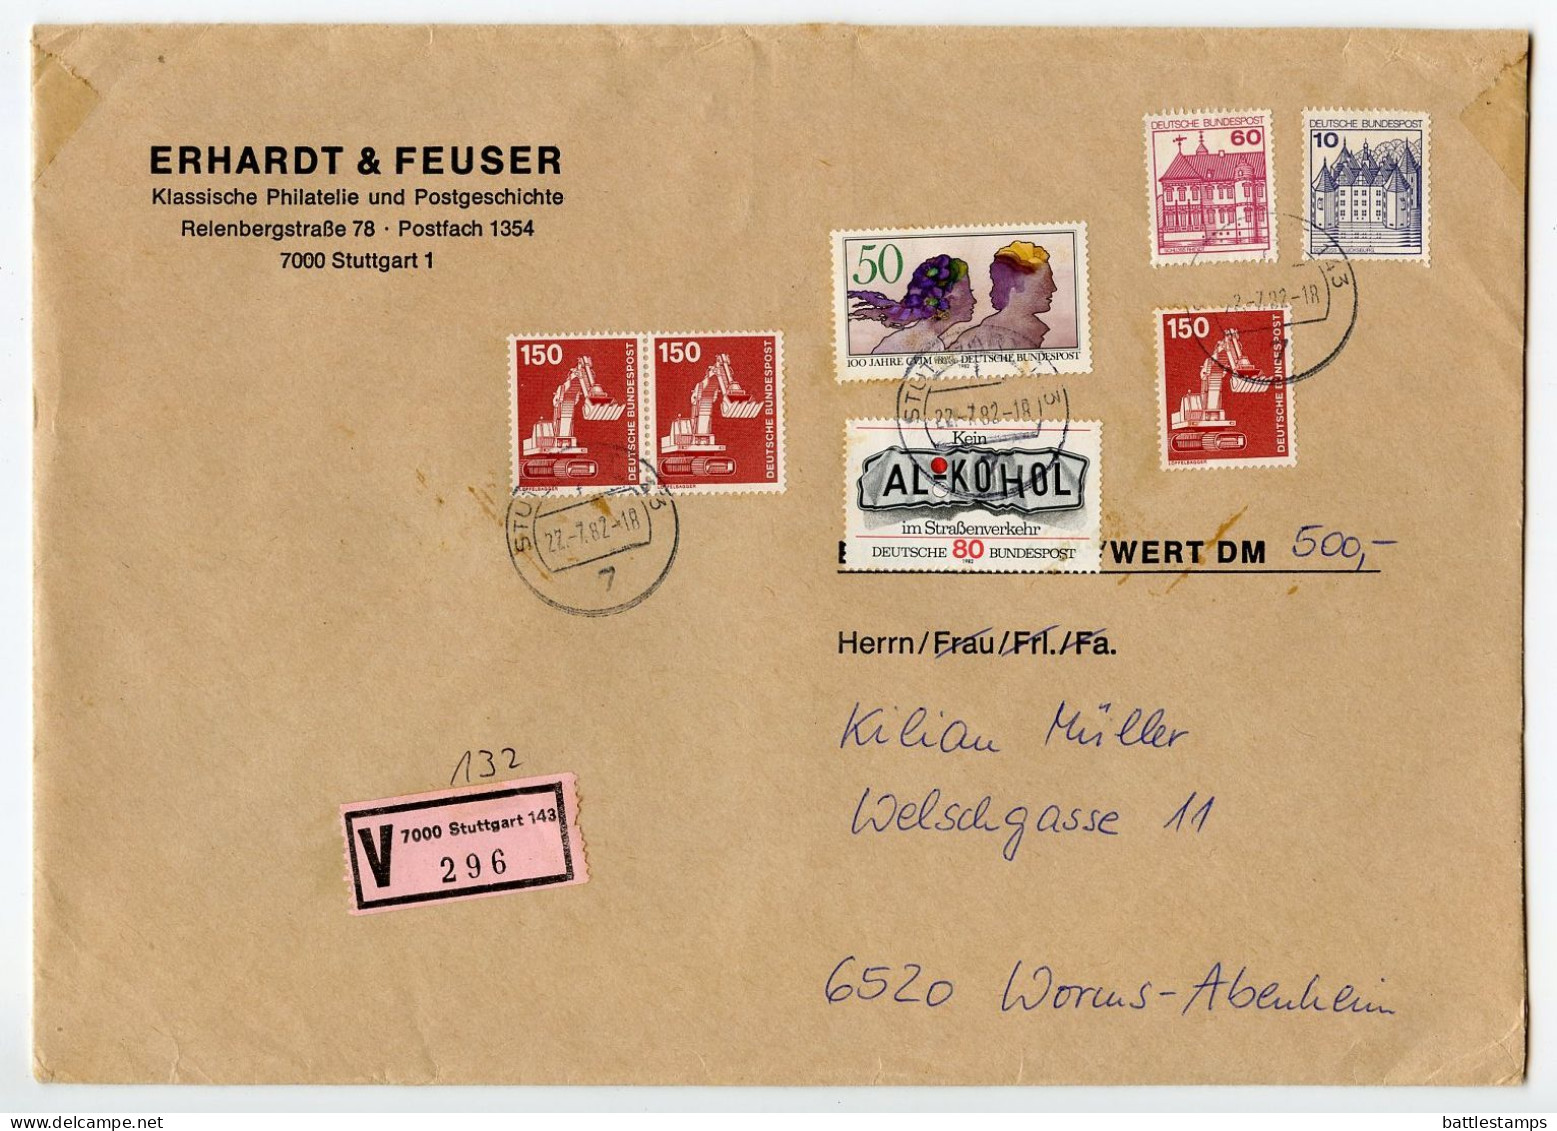 Germany, West 1982 Insured V-Label Cover; Stuttgart To Worms-Abenheim; Mix Of Stamps - Covers & Documents